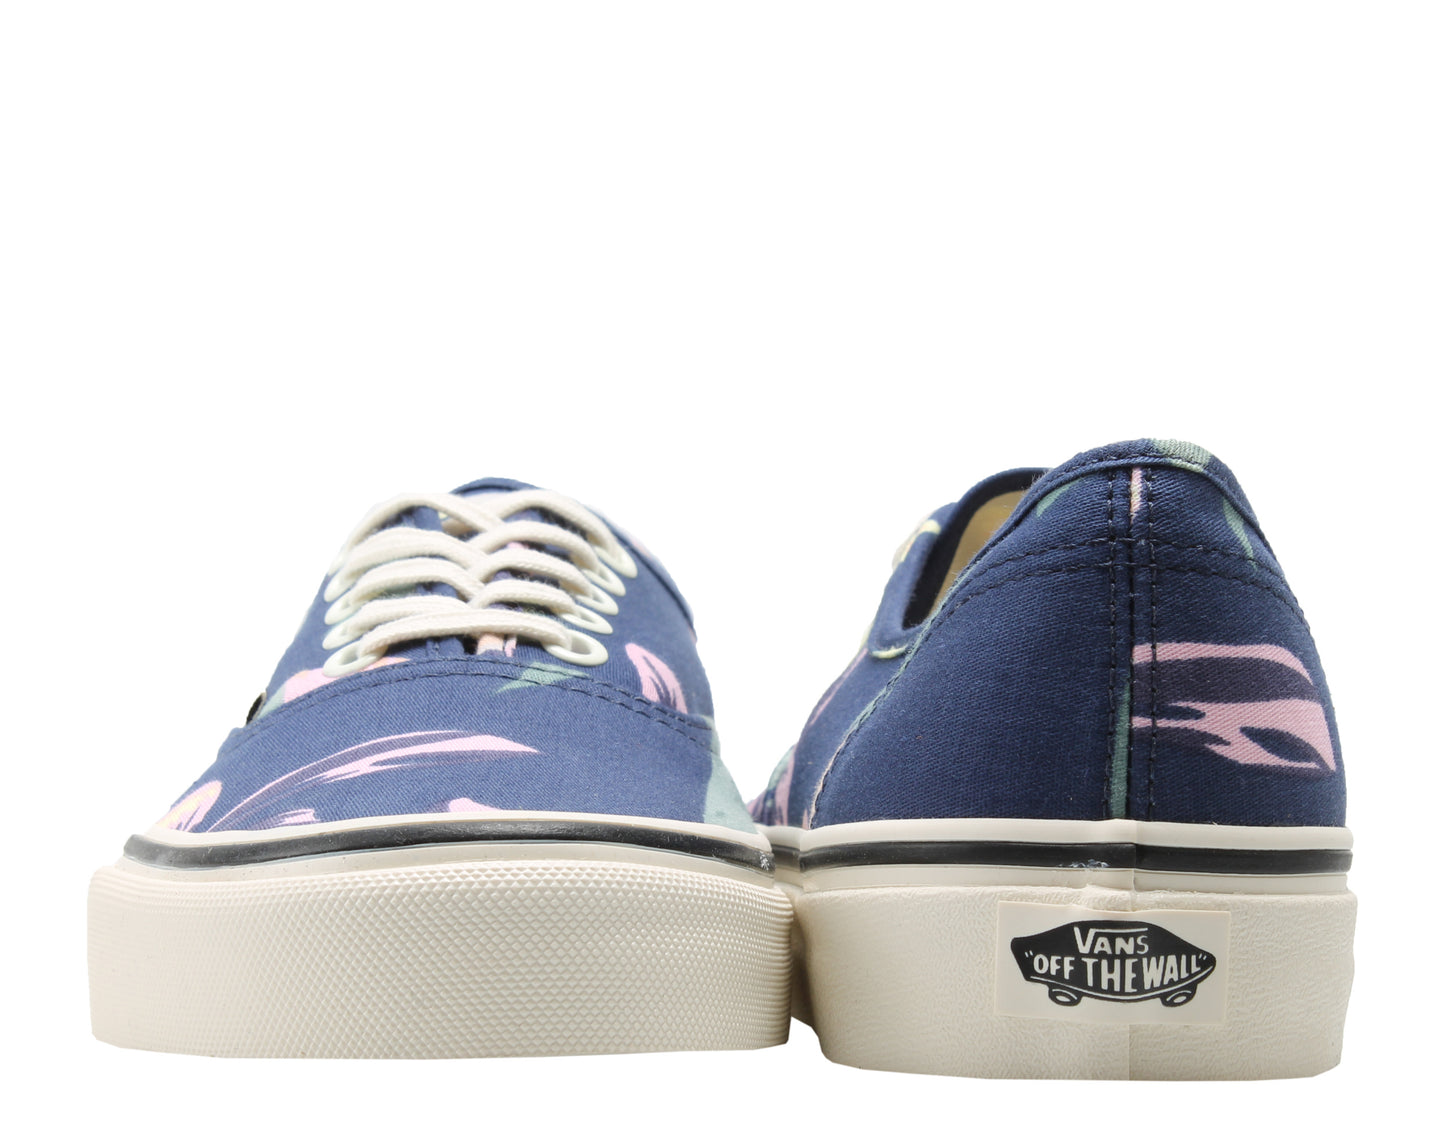 Vans Authentic Vintage Floral Navy/Marshmallow Low Top Sneakers VN0A38EMOJP